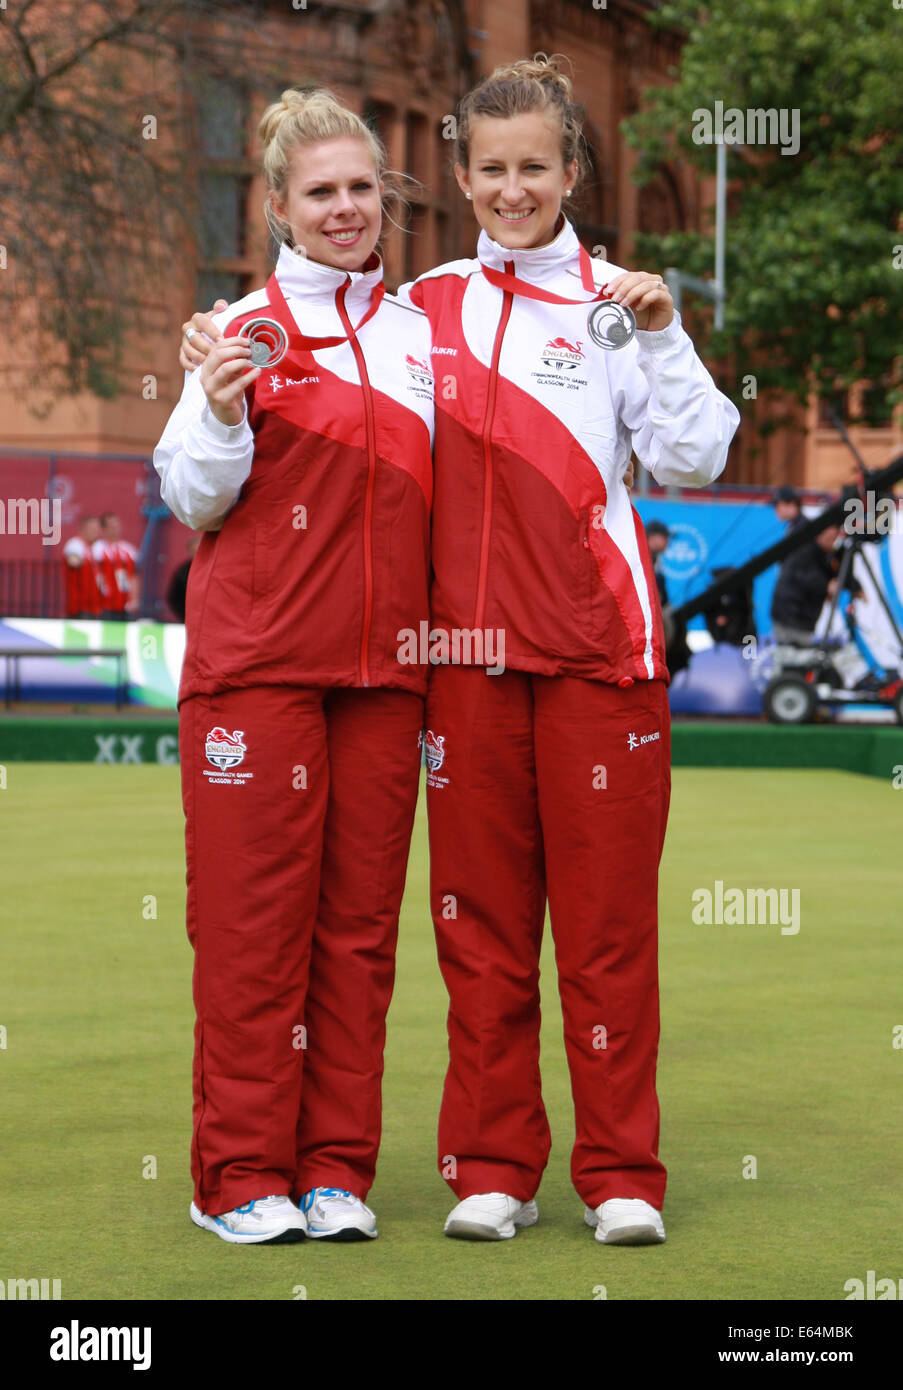 Jamie-Lea WINCH & Natalie MELMORE of England with their silver medals in the Womens Pairs at the Kelvingrove Lawn Bowls Centre, Stock Photo